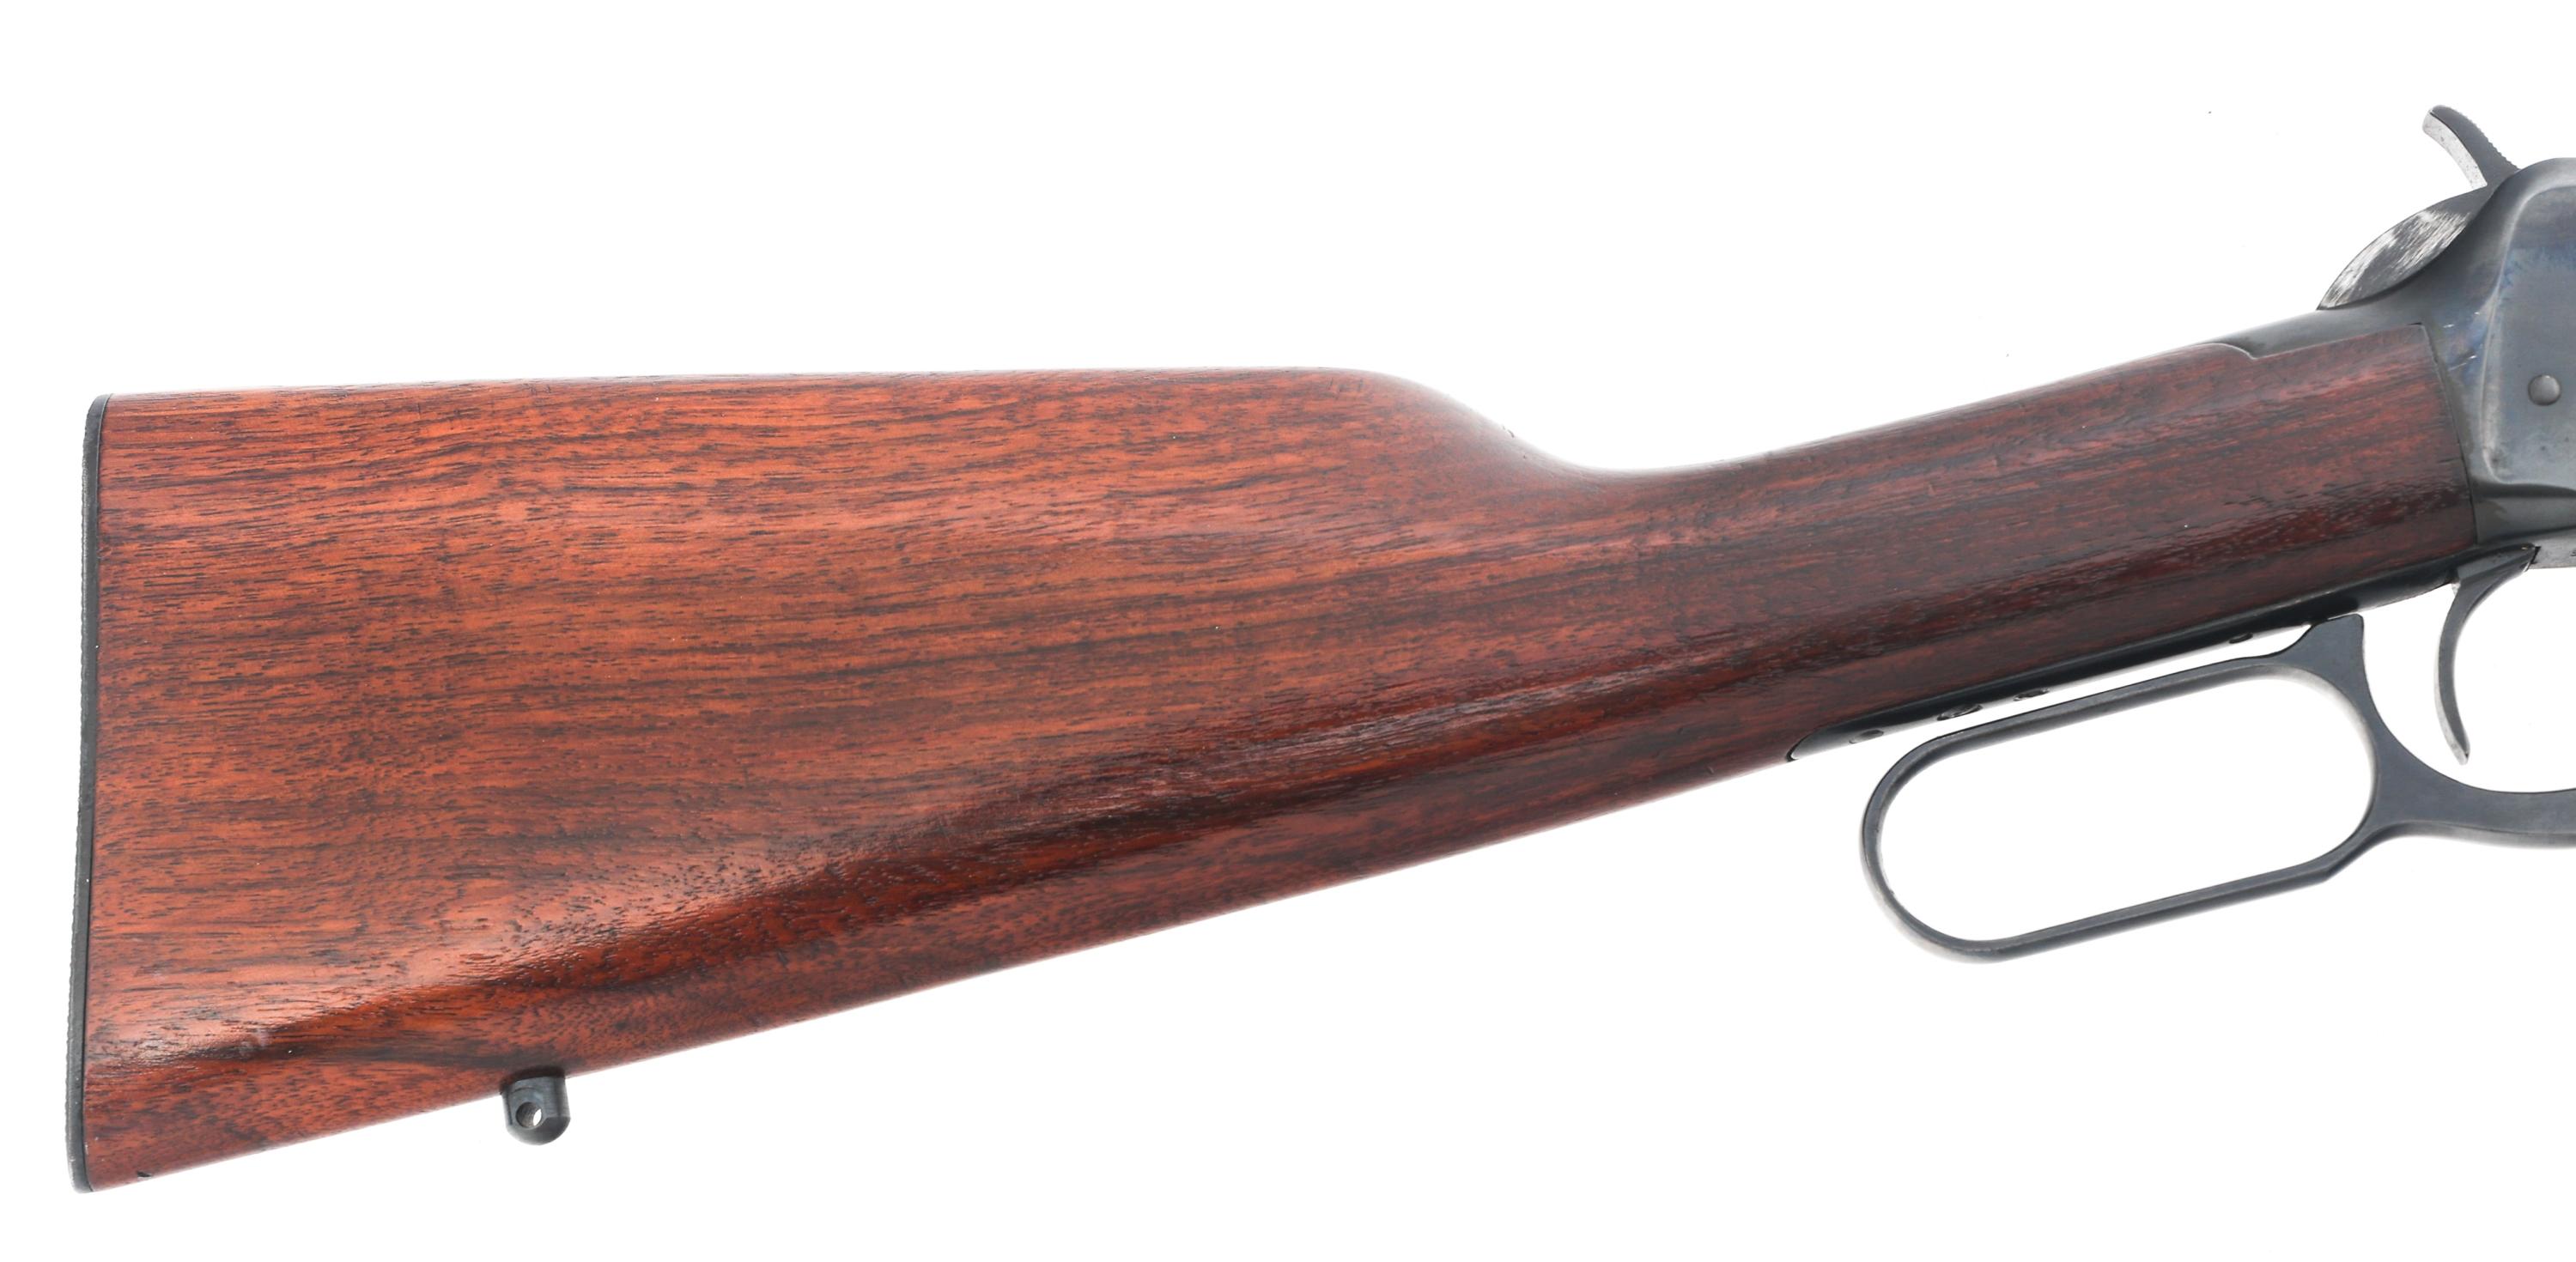 WINCHESTER MODEL 94 .32 CALIBER LEVER ACTION RIFLE